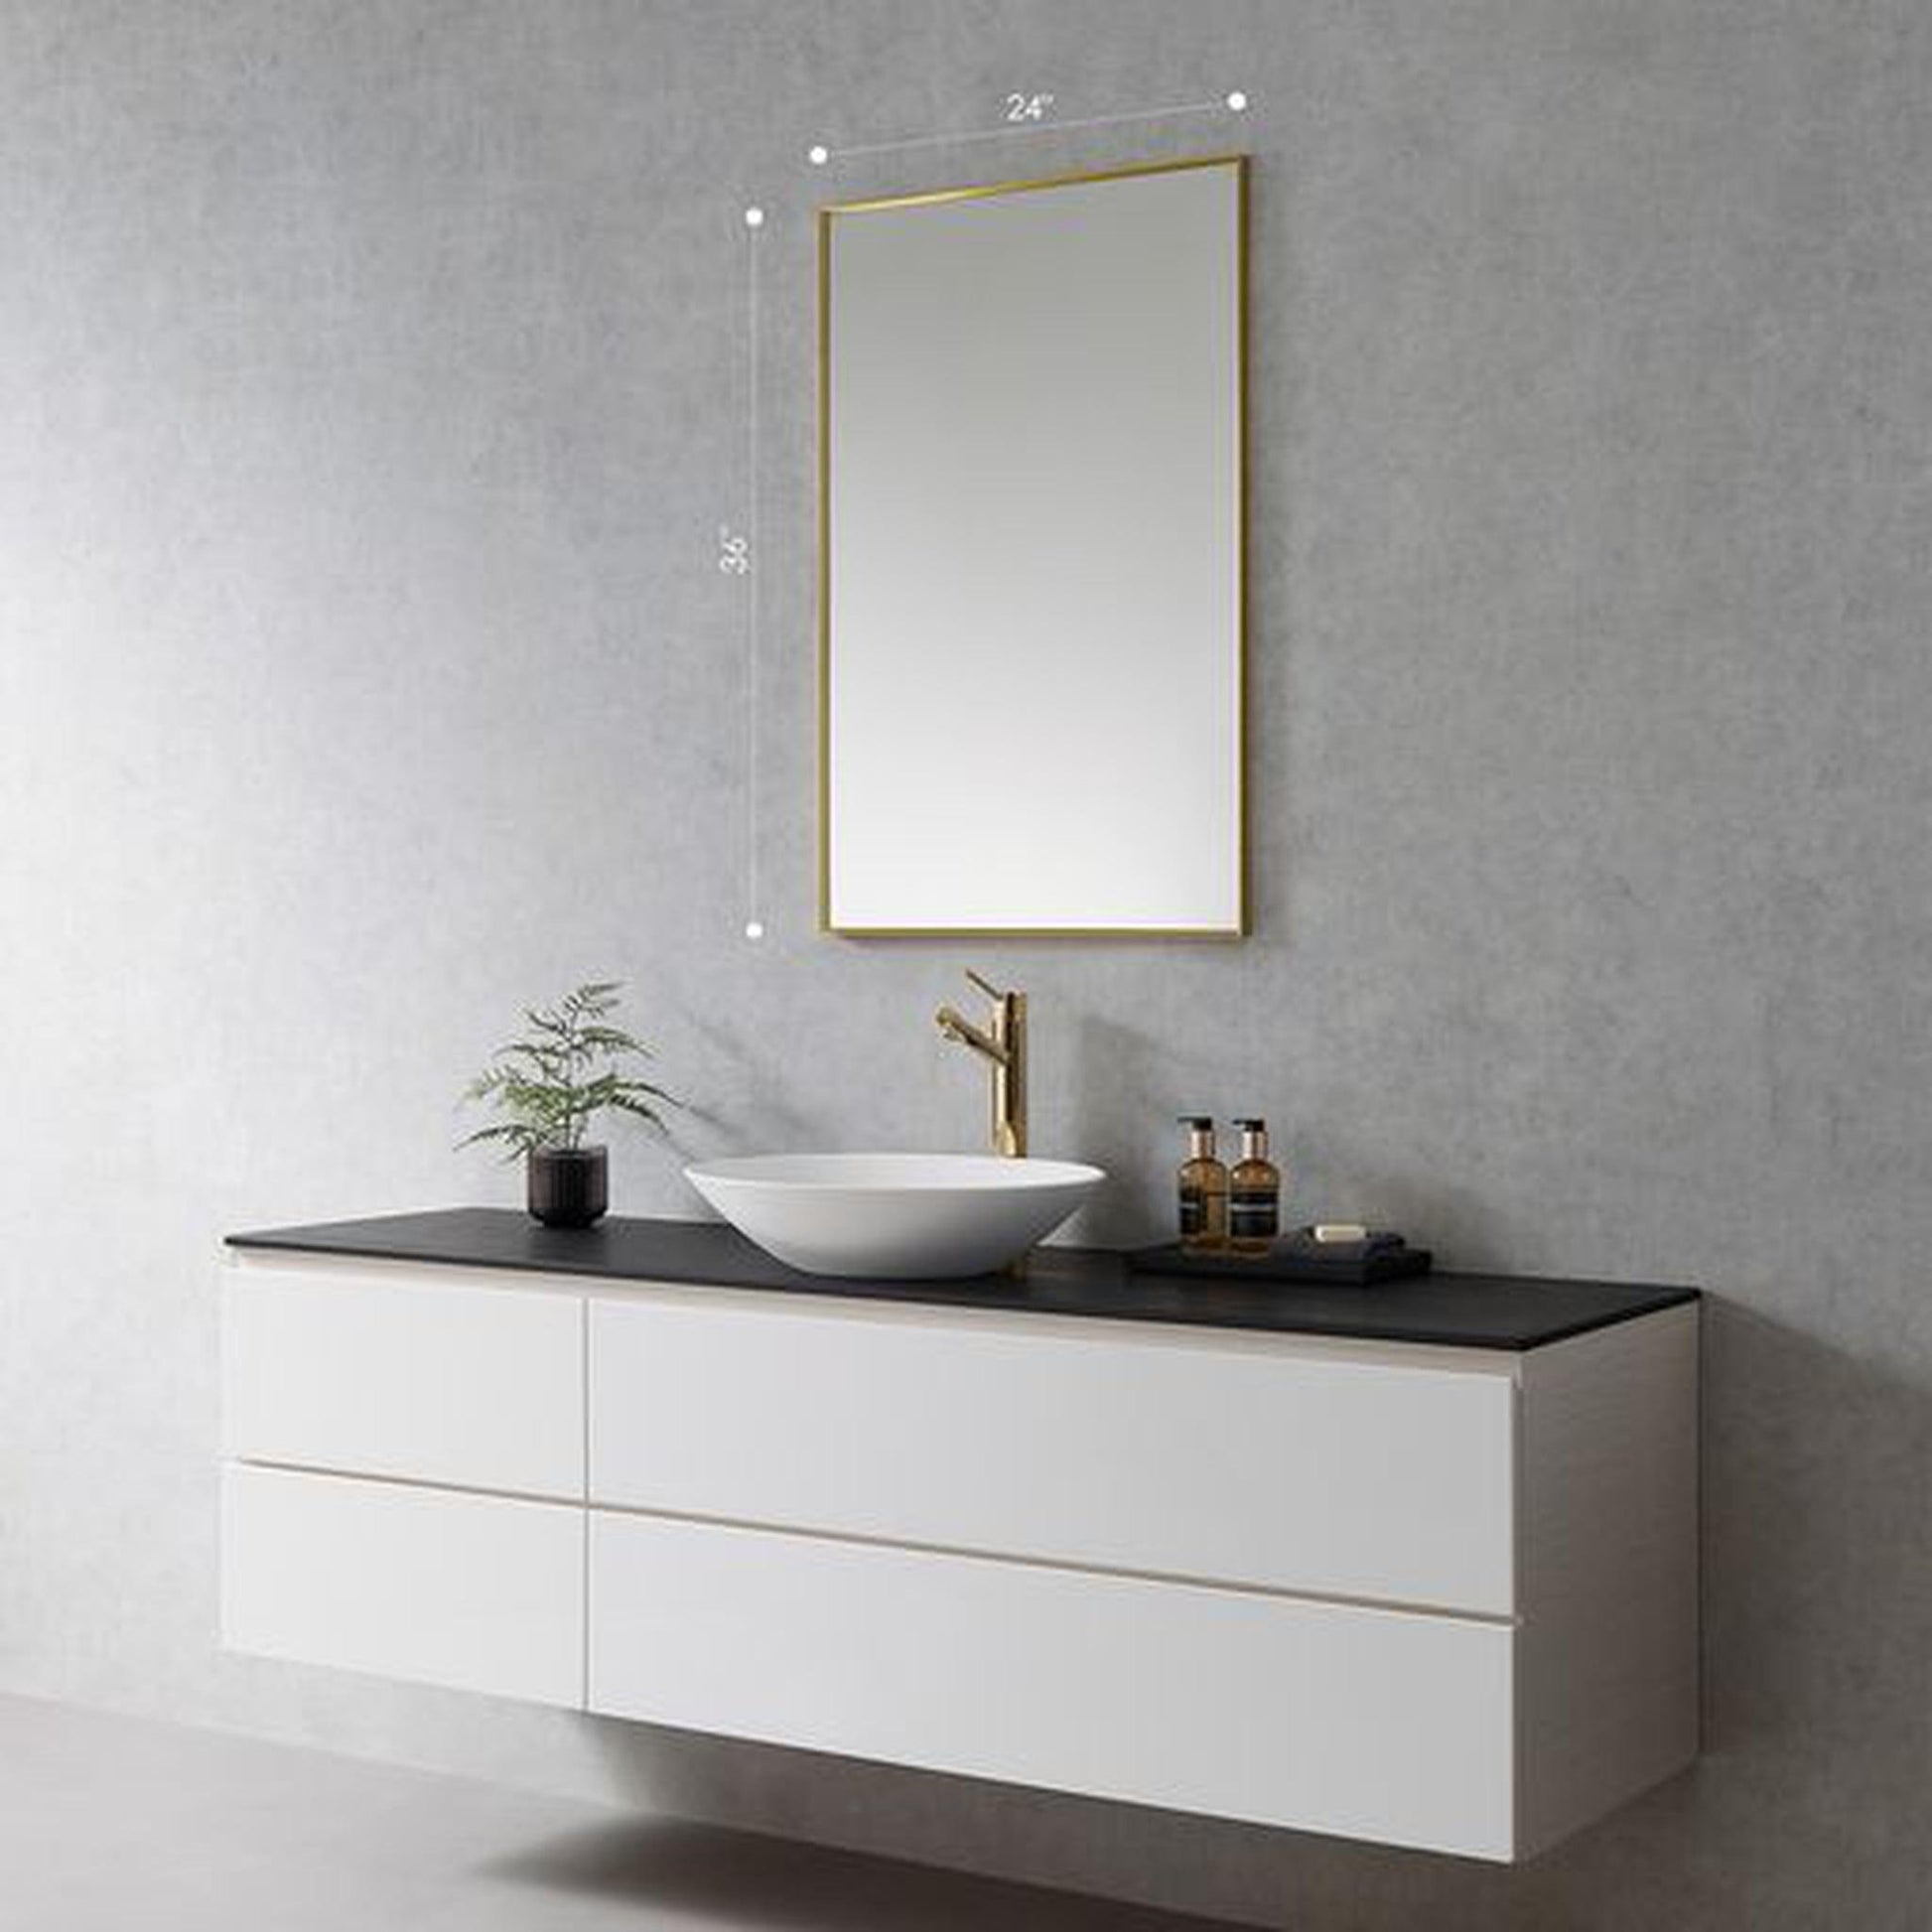 Altair Sassi 24" Rectangle Brushed Gold Aluminum Framed Wall-Mounted Mirror